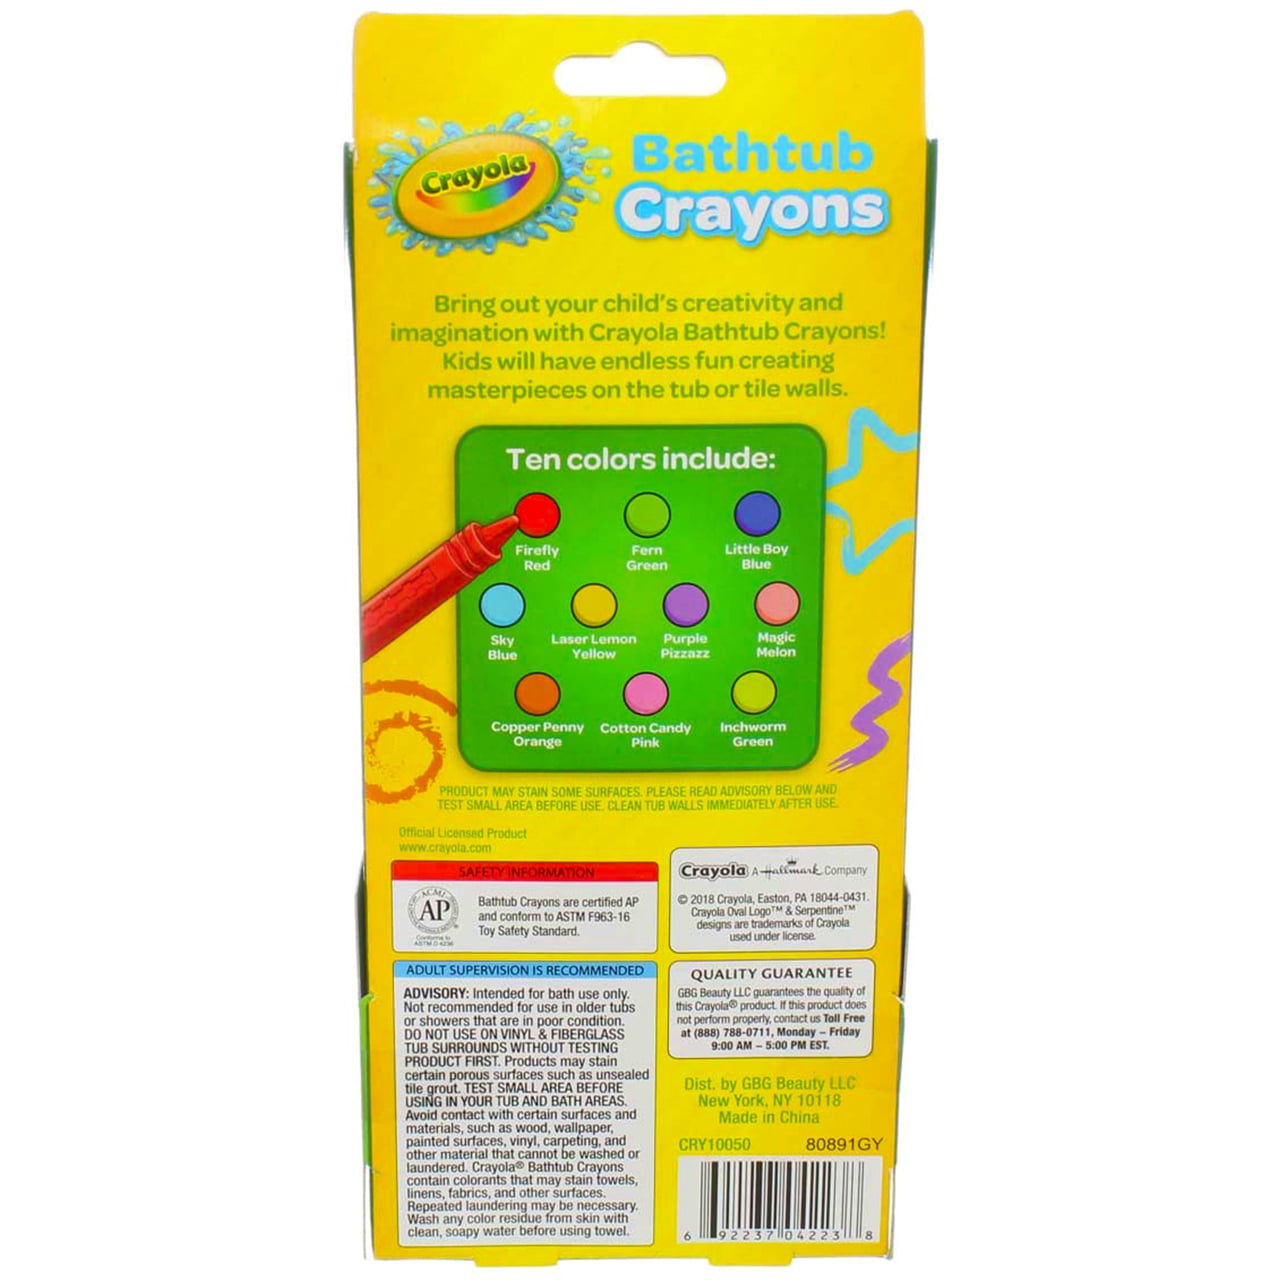 Crayola Bathtub Crayons and Markers: What's Inside the Box